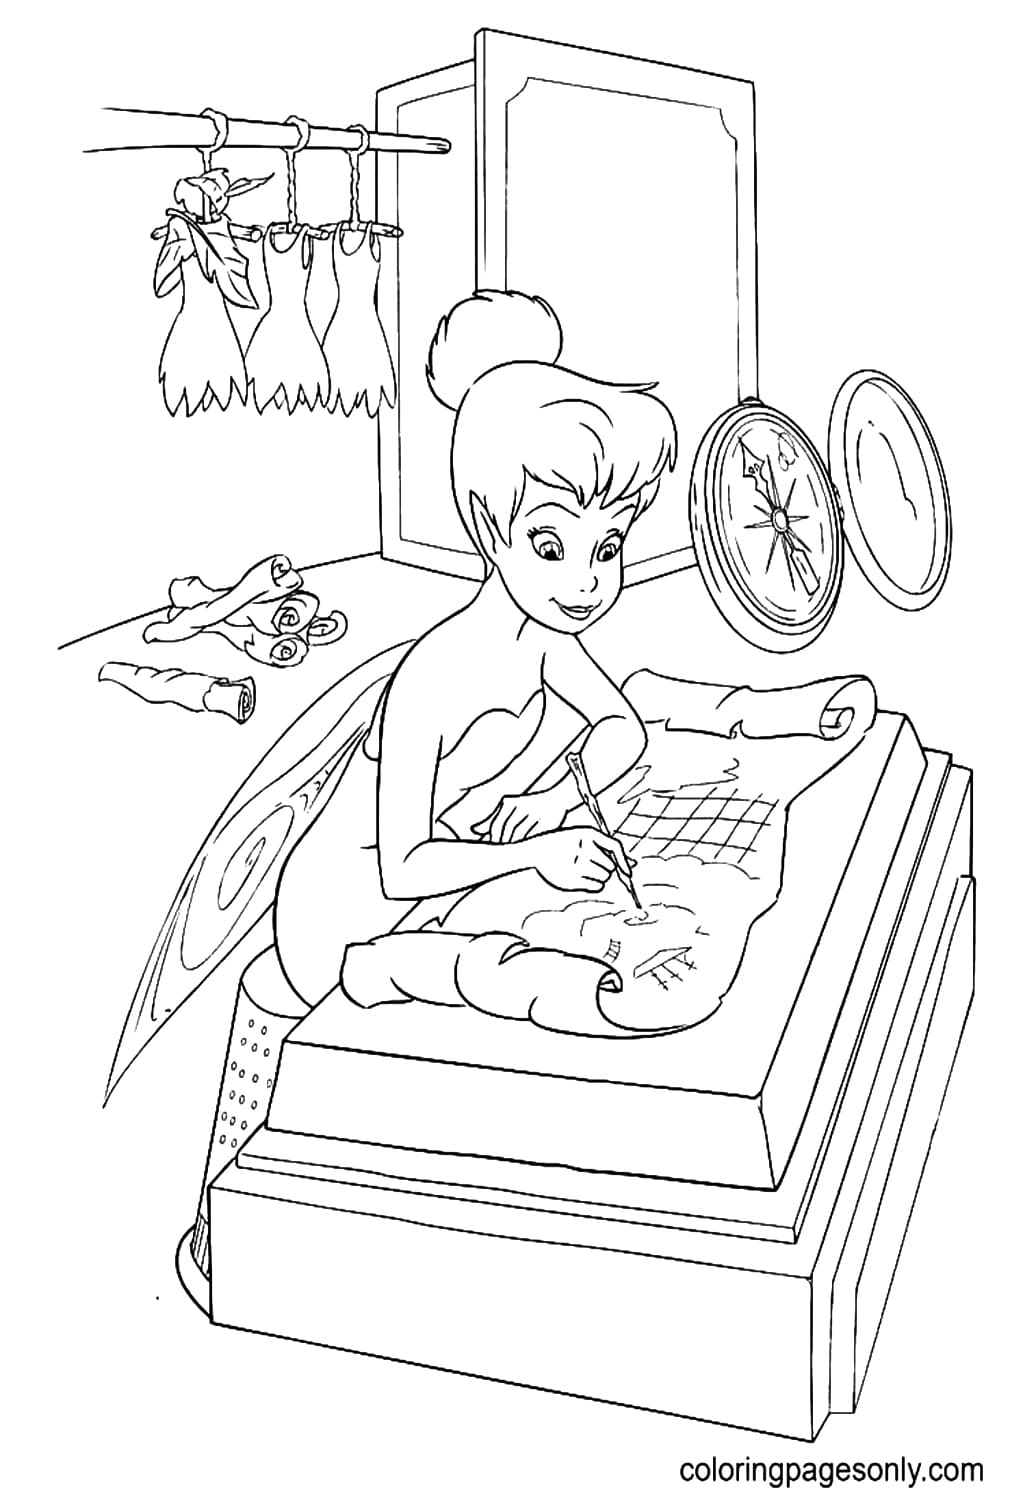 Tinkerbell Builds Hot Air Balloons Coloring Page